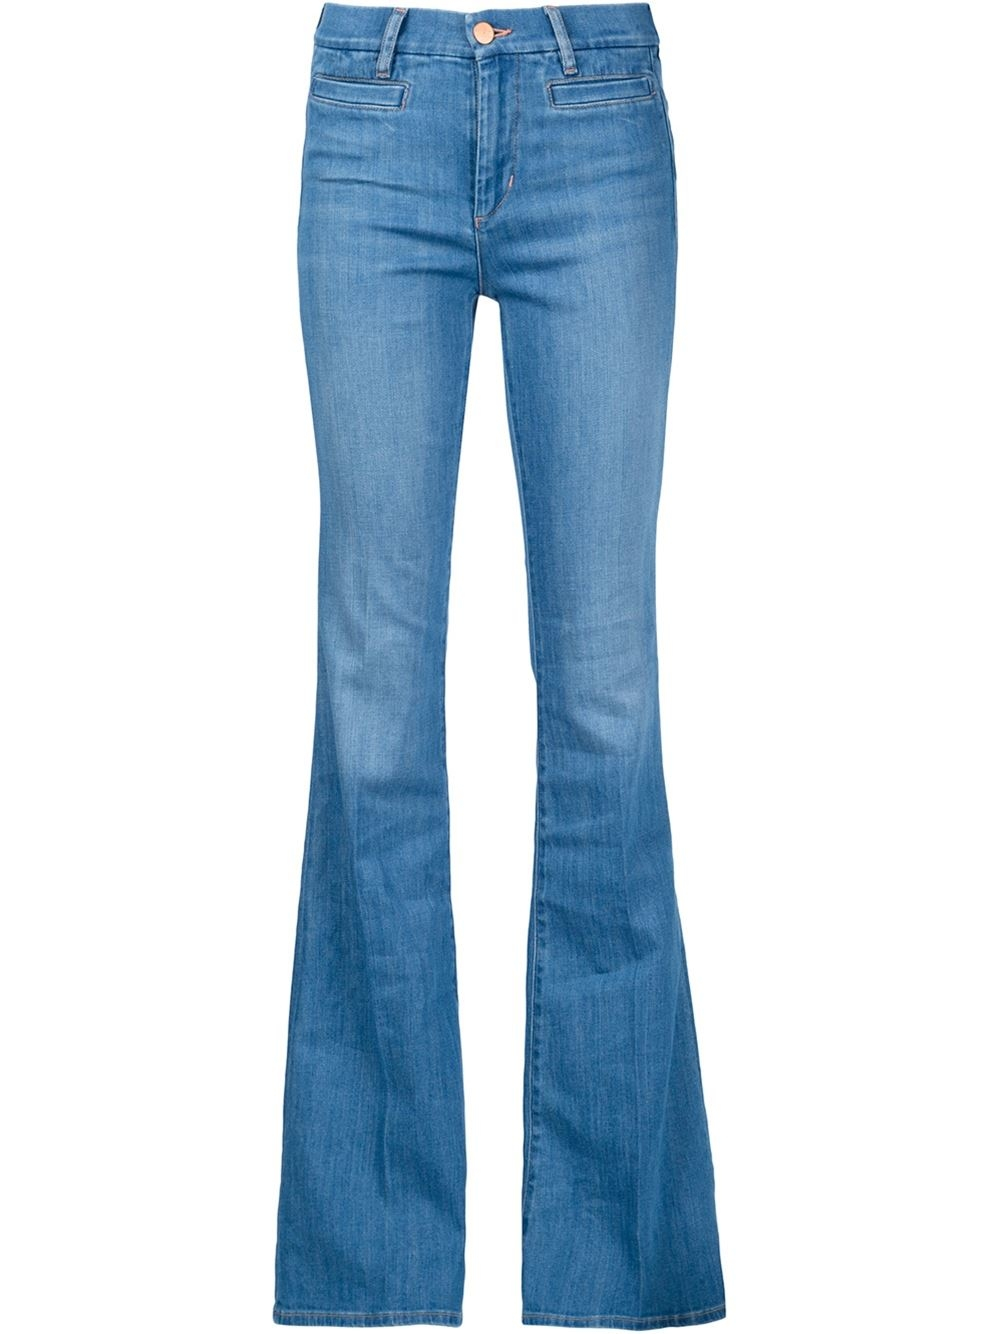 M.i.h jeans 'marrakesh' Jeans in Blue | Lyst